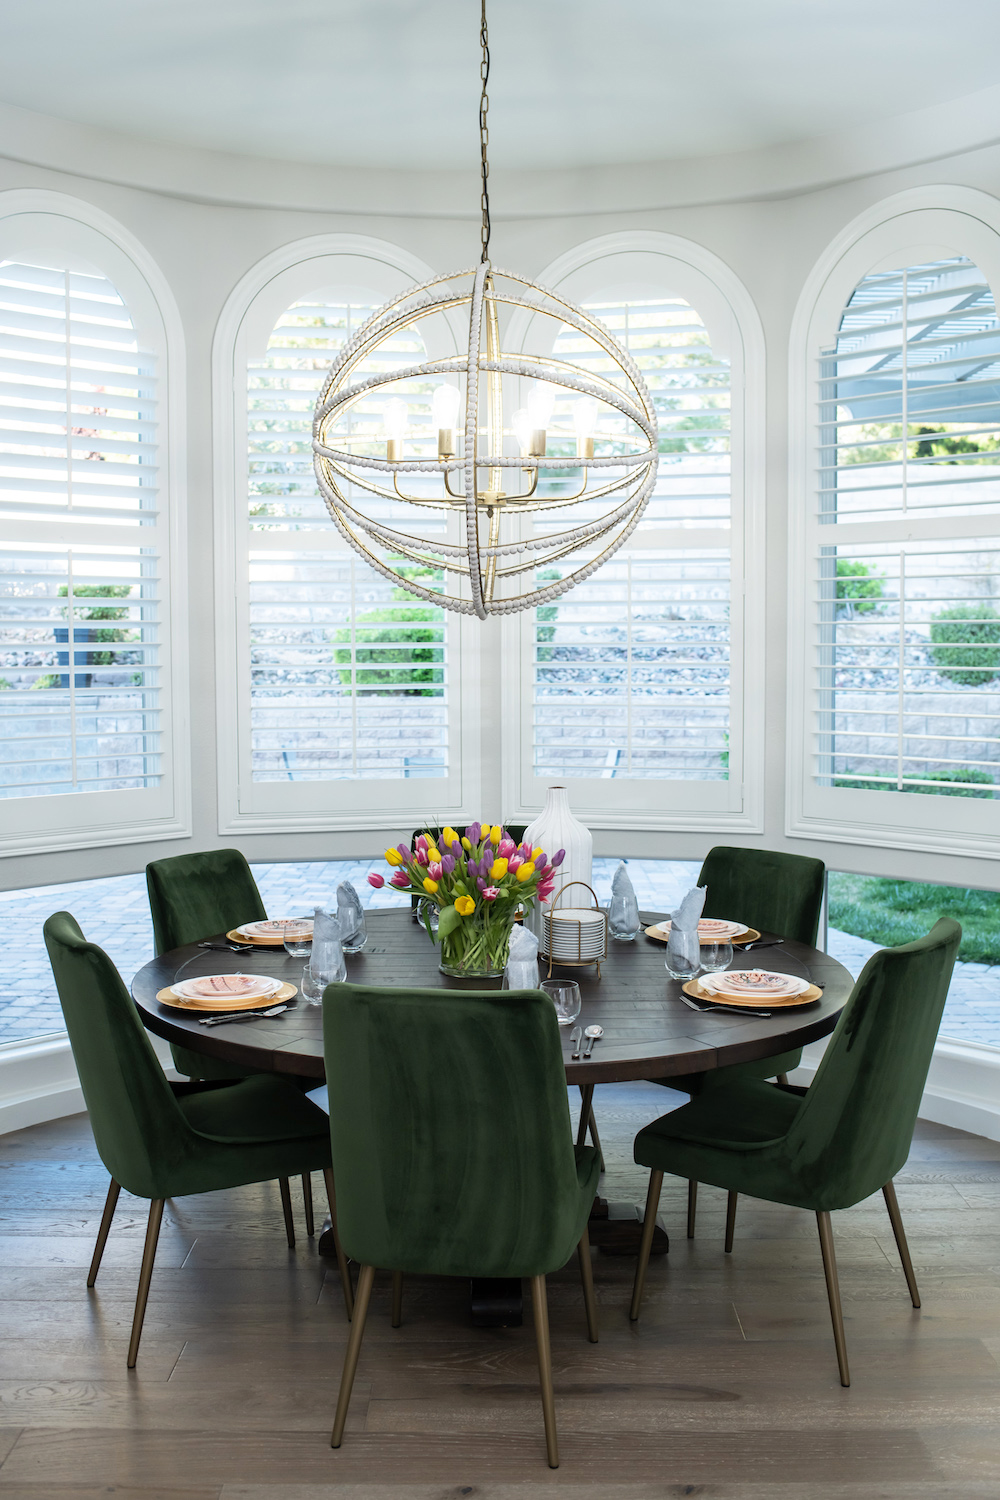 A dining room next to bay windows with a large circular table, offbeat chandelier and stunning plush green chairs